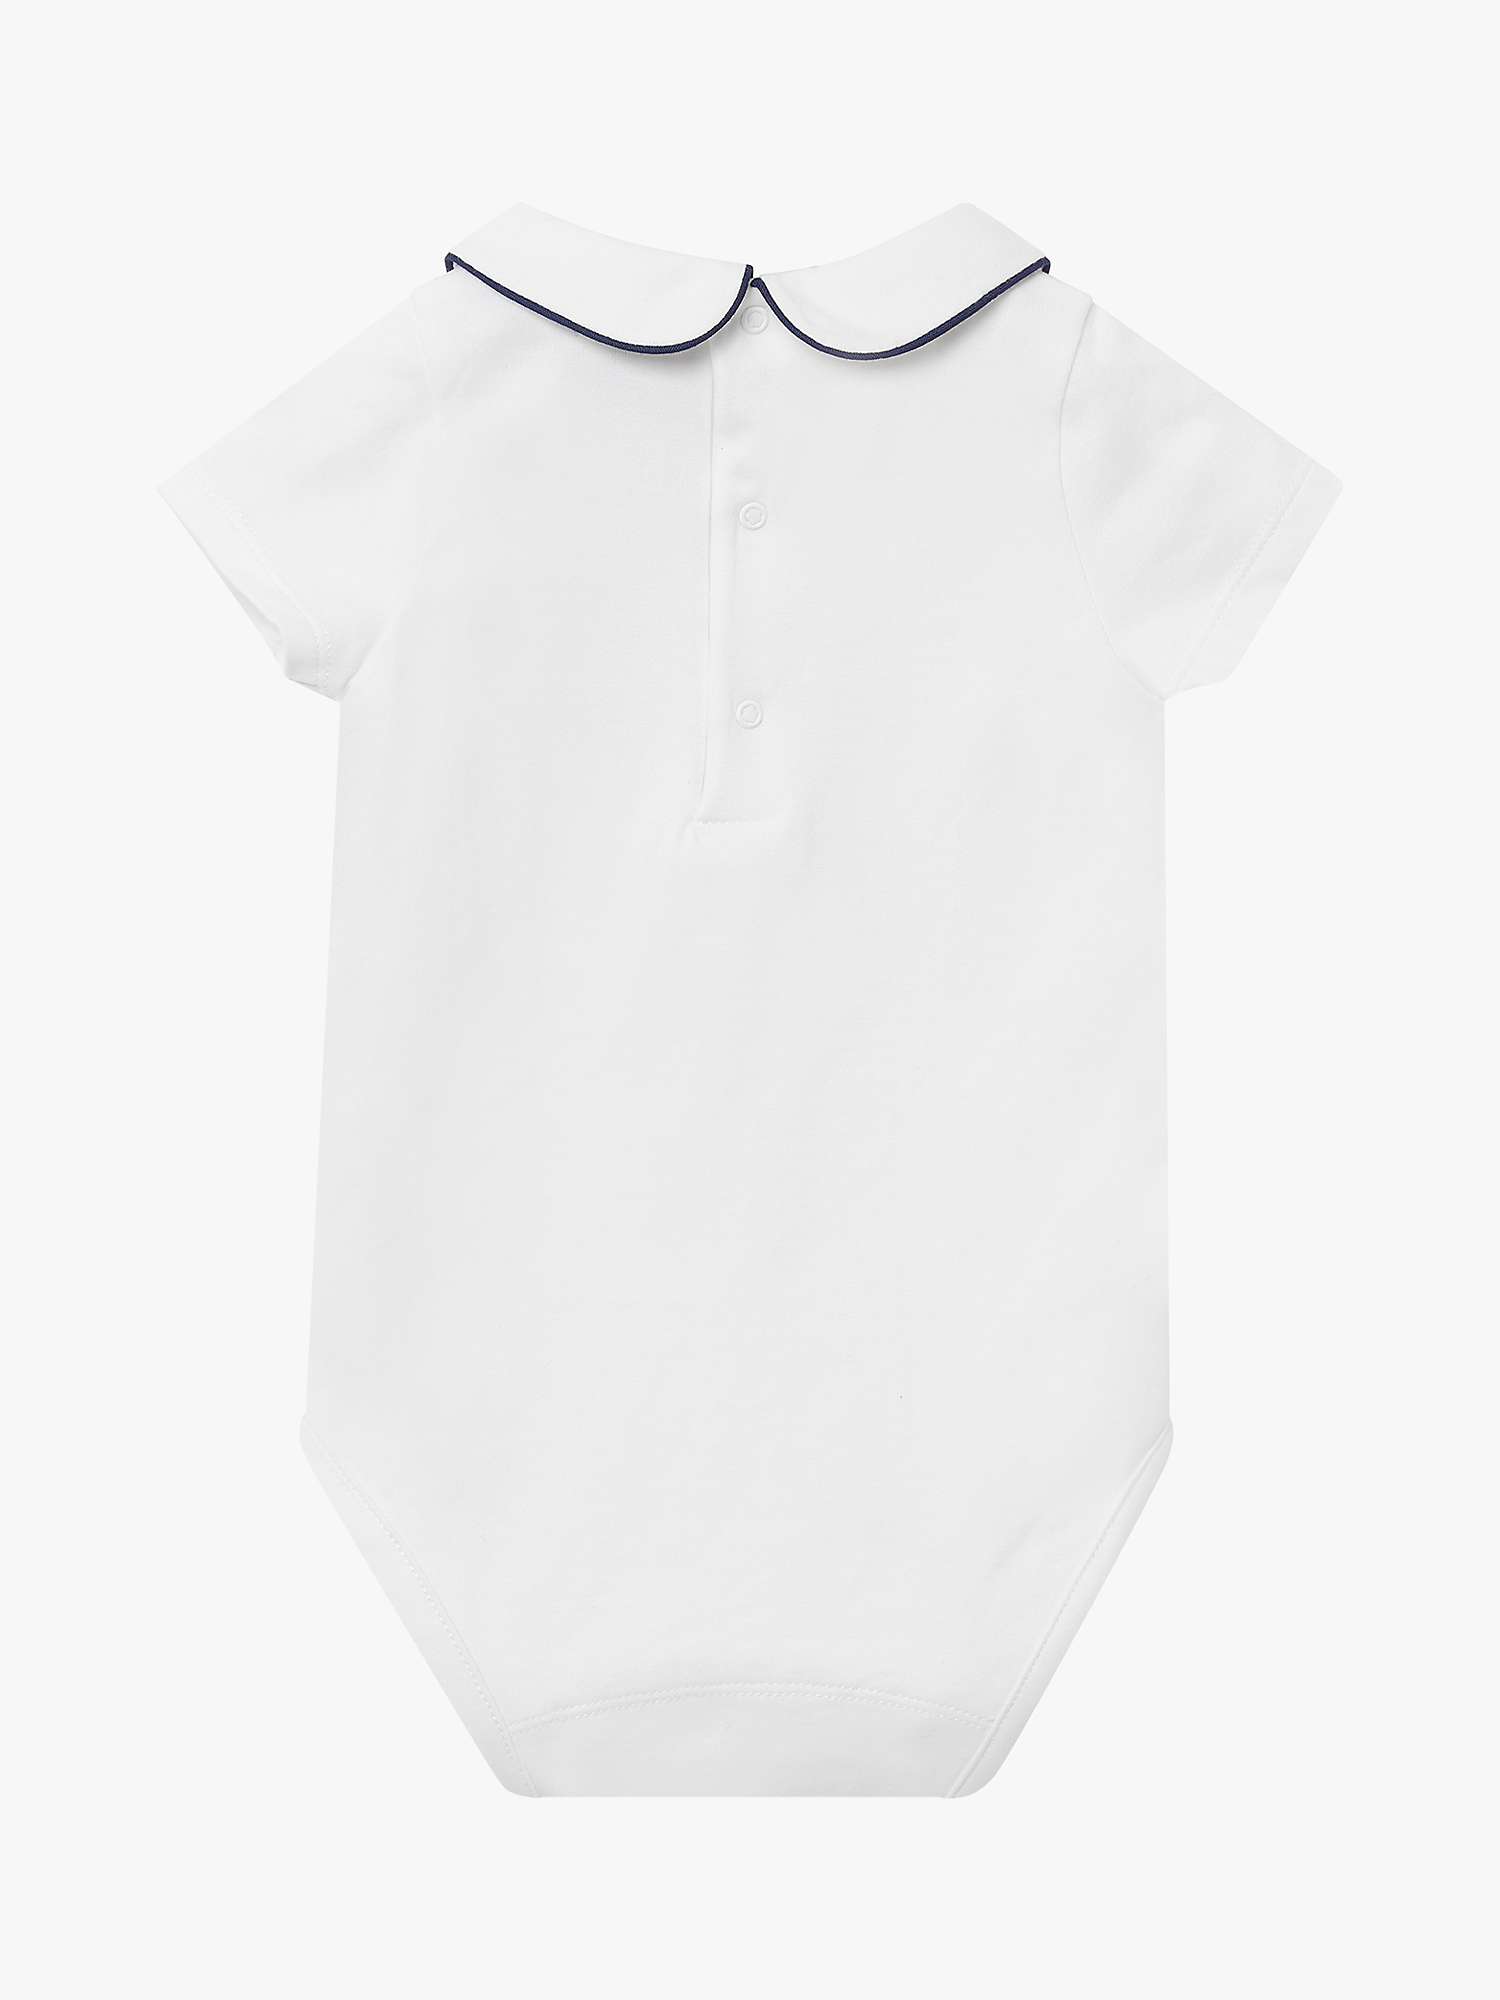 Buy Trotters Thomas Brown Baby Milo Piped Short Sleeve Jersey Bodysuit Online at johnlewis.com